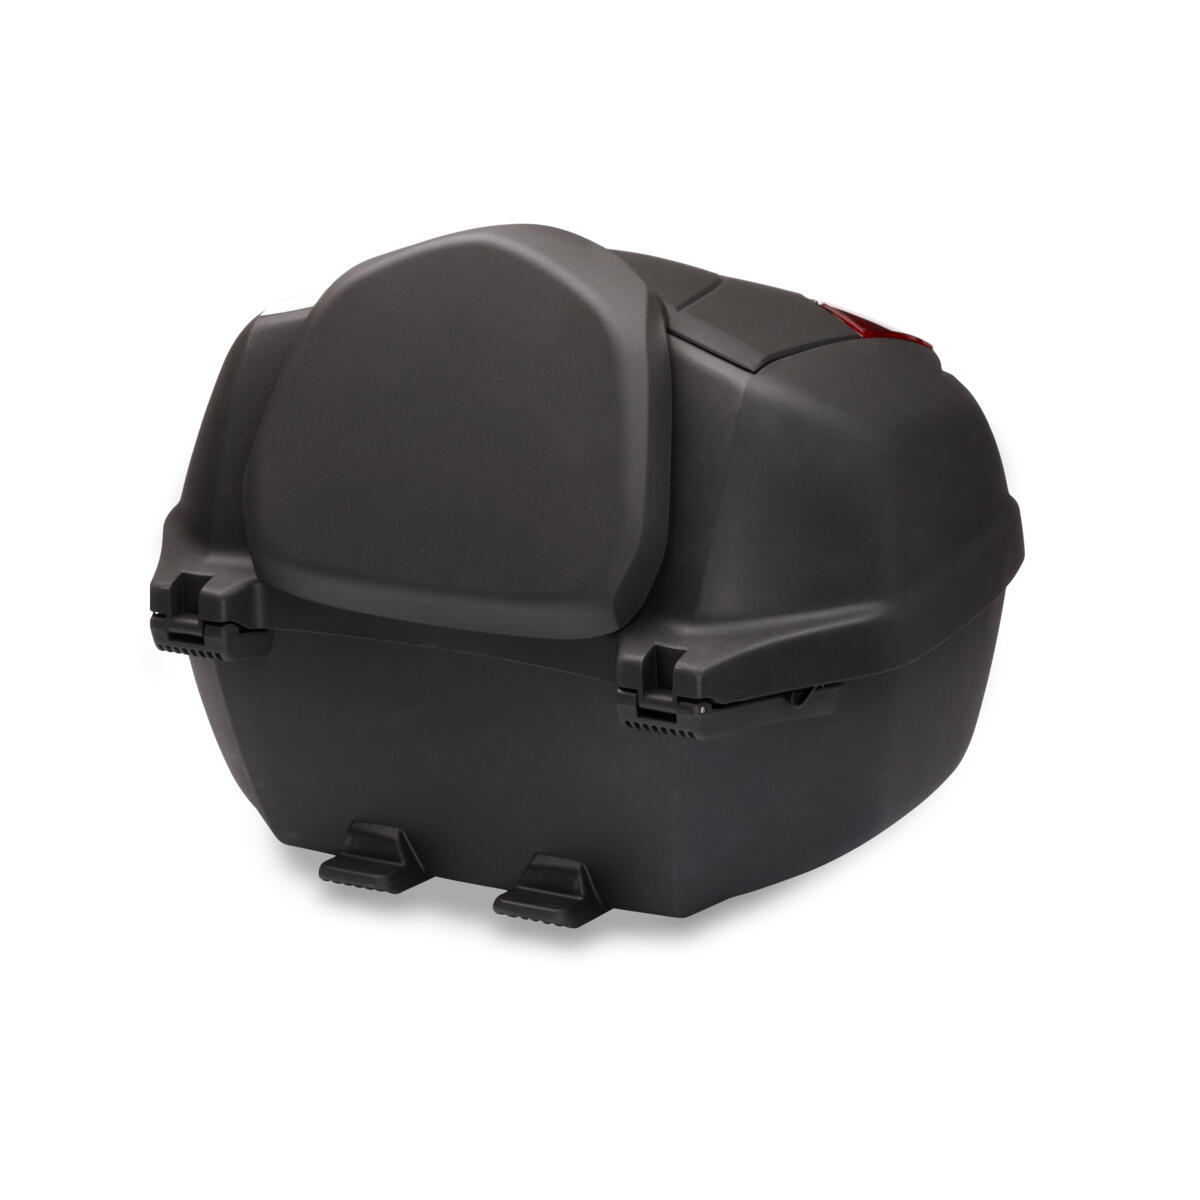 If you're using your TRACER 7 for the daily ride to work in the city, the Urban Pack's 39-litre lockable black top case gives you the flexibility to carry your belongings safely and securely. And with a handy USB adaptor you can run sat nav or power devices and stay in control